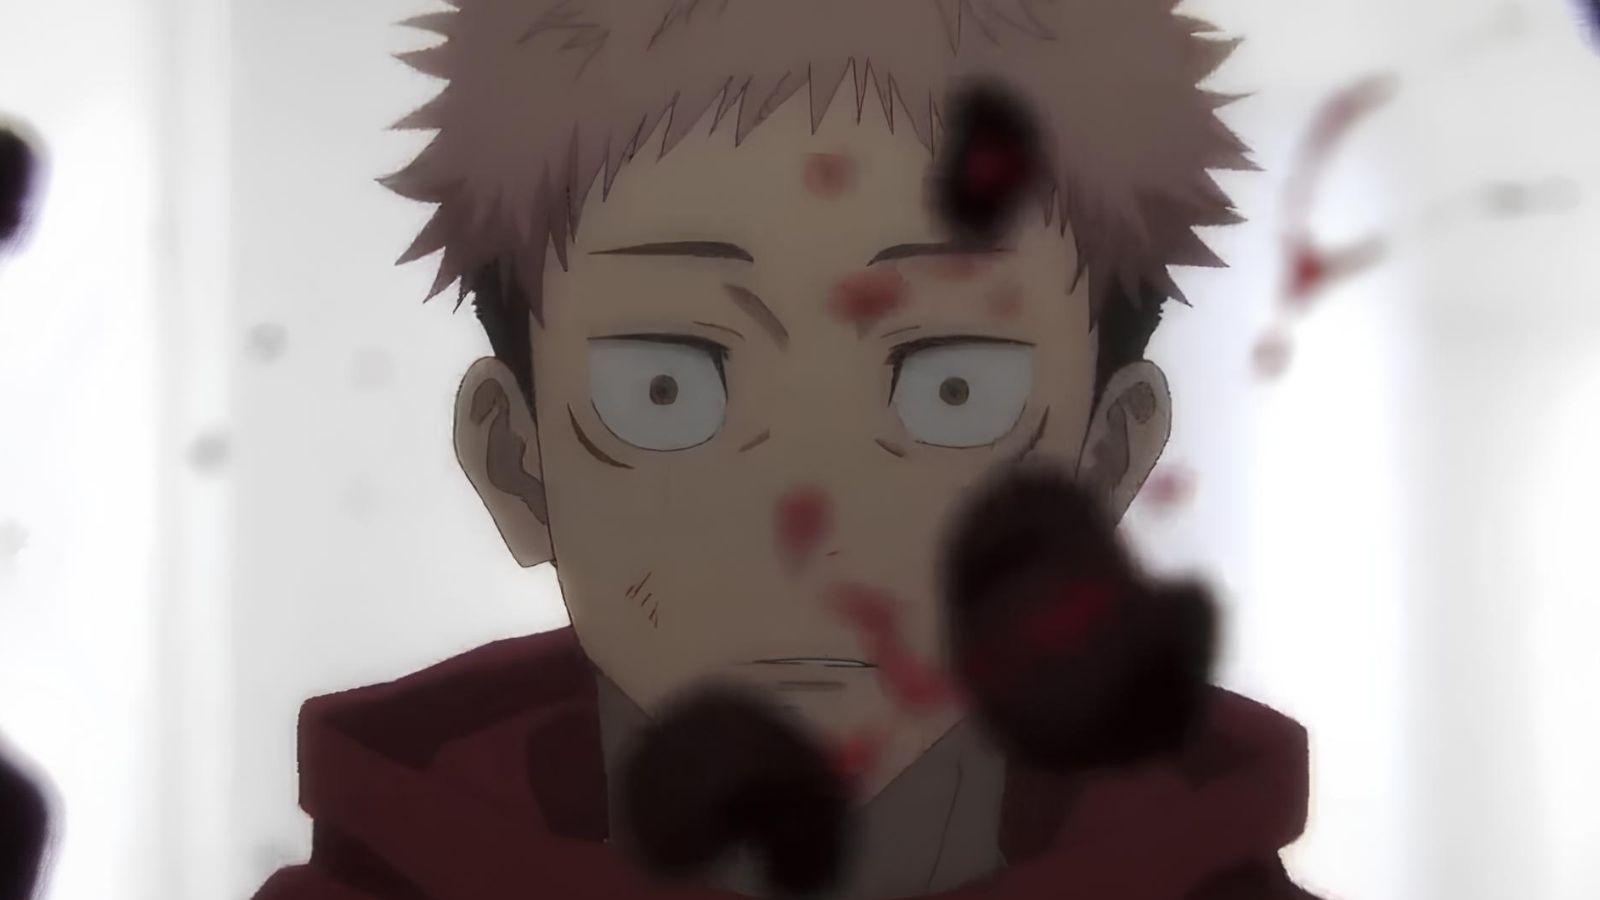 Jujutsu Kaisen fans worried about major character amid constant deaths - Dexerto